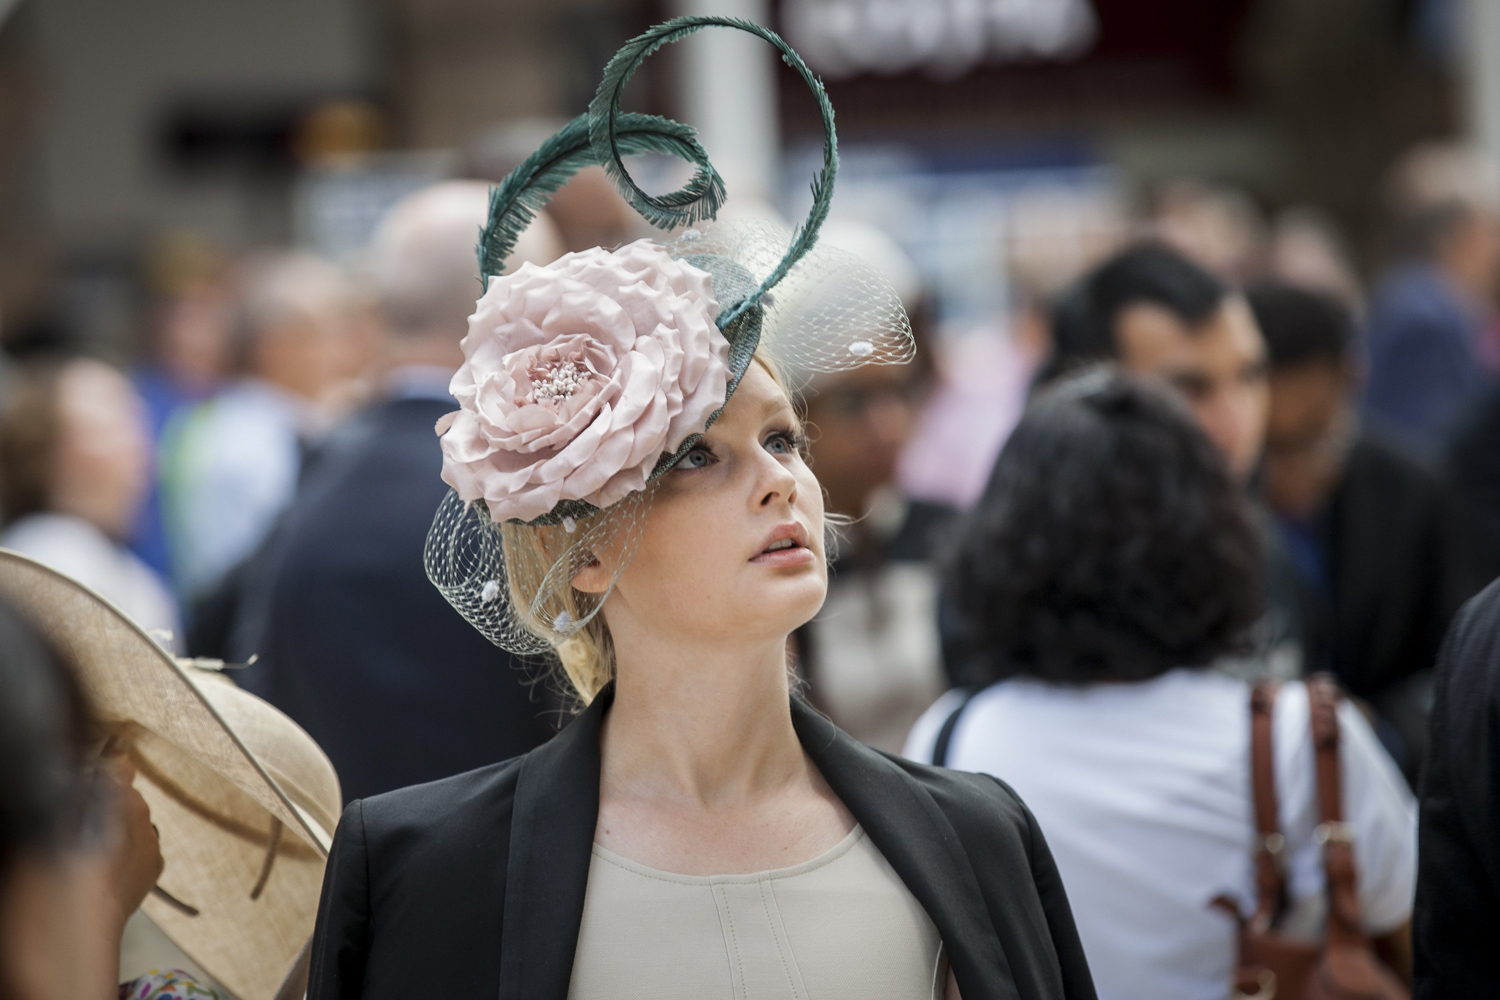 Racegoer about to travel by train from Waterloo station to Ascot racecourse to attend Royal Ascot on June 17, 2014 in London.